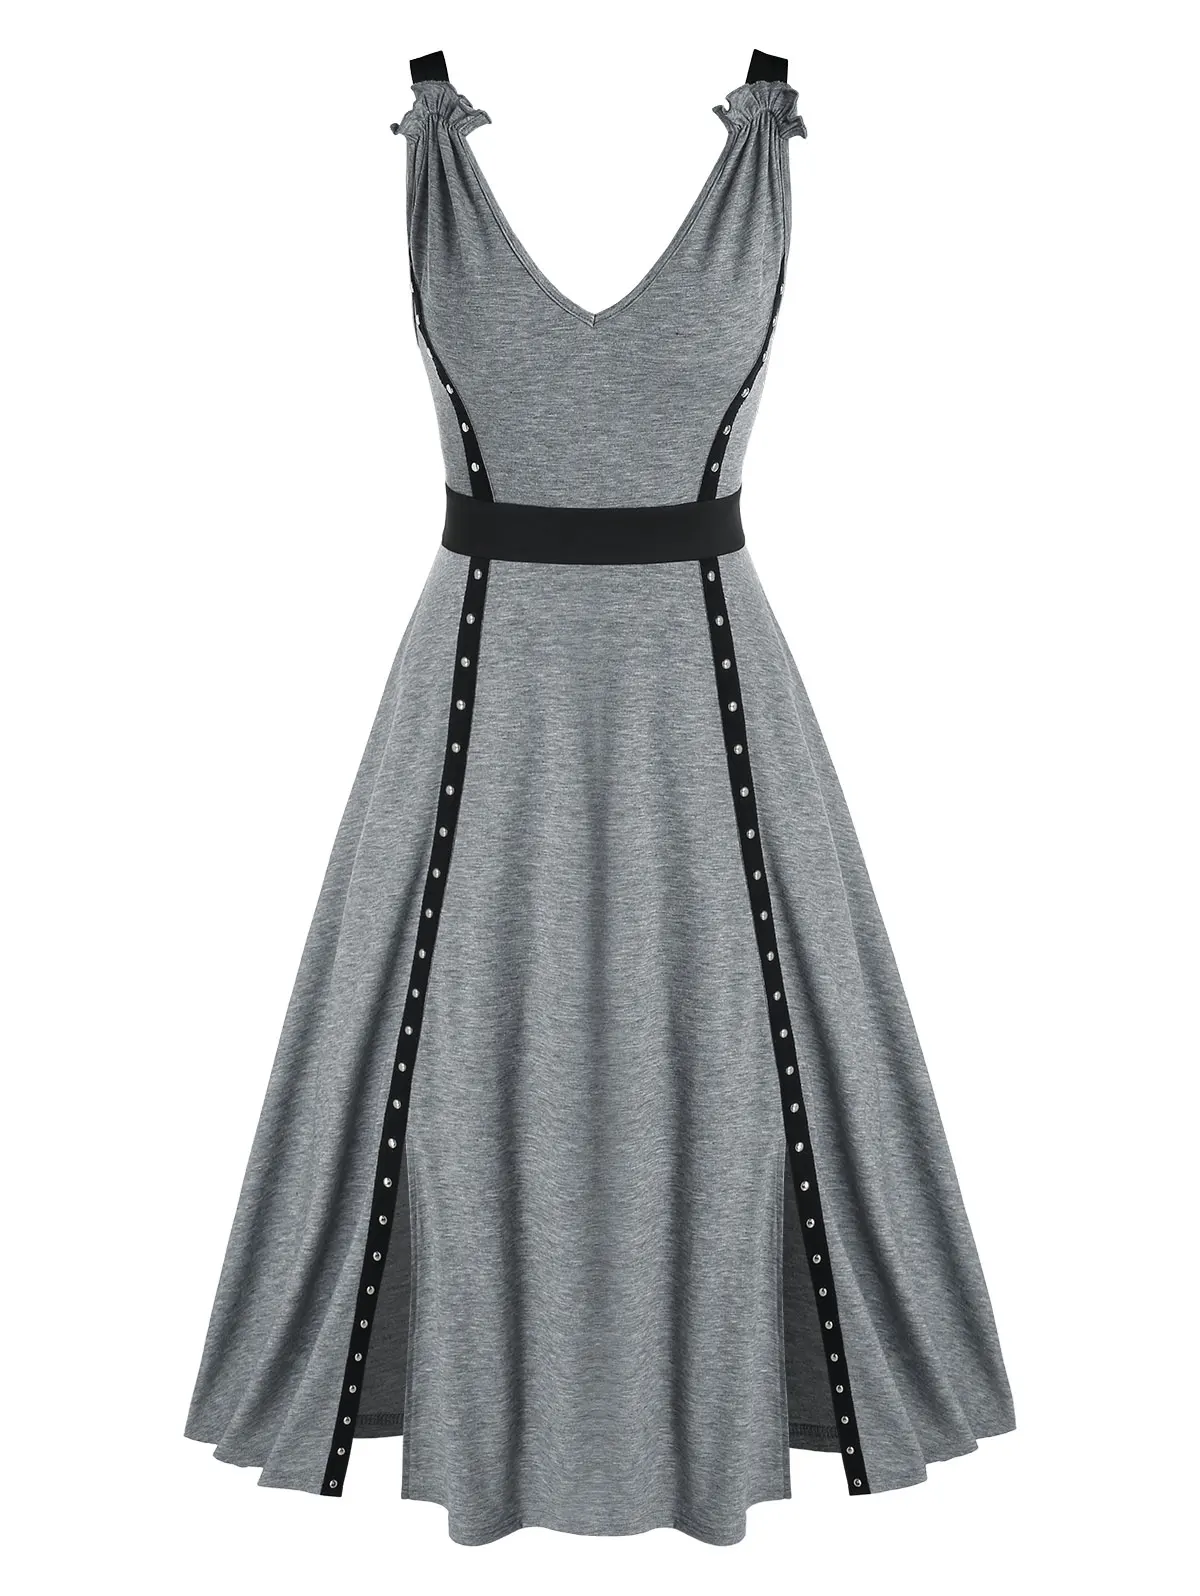 

Ruffle Studded Slit Mid-calf Dress Flare A Line Sleeveless Casual Colorblock Dresses For Summer